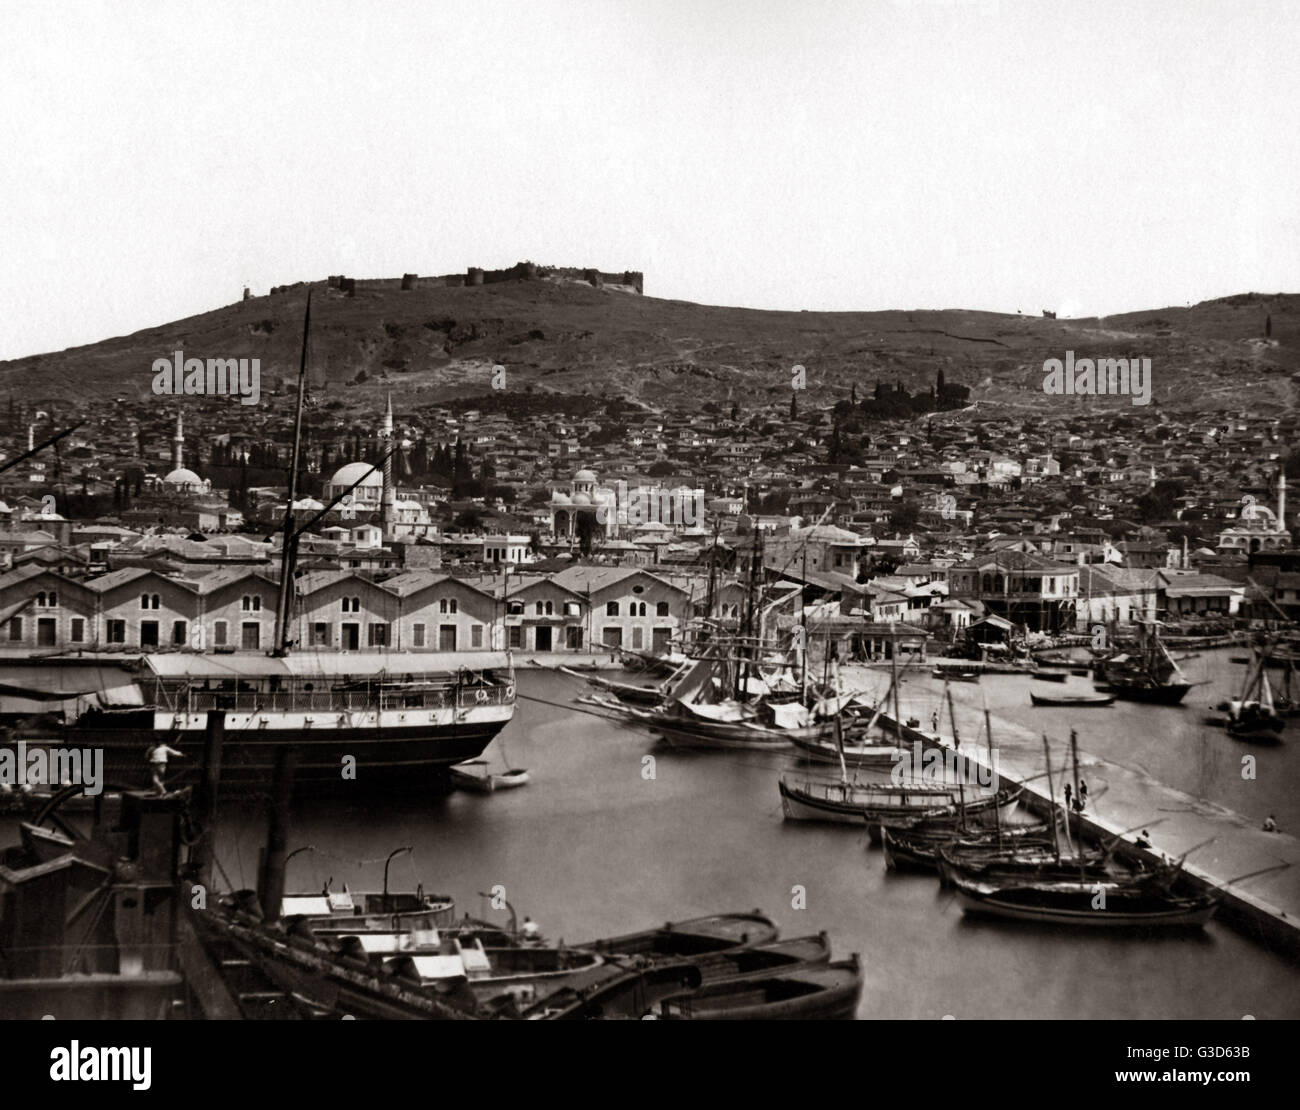 Smyrna, Turquie vers 1890 Banque D'Images